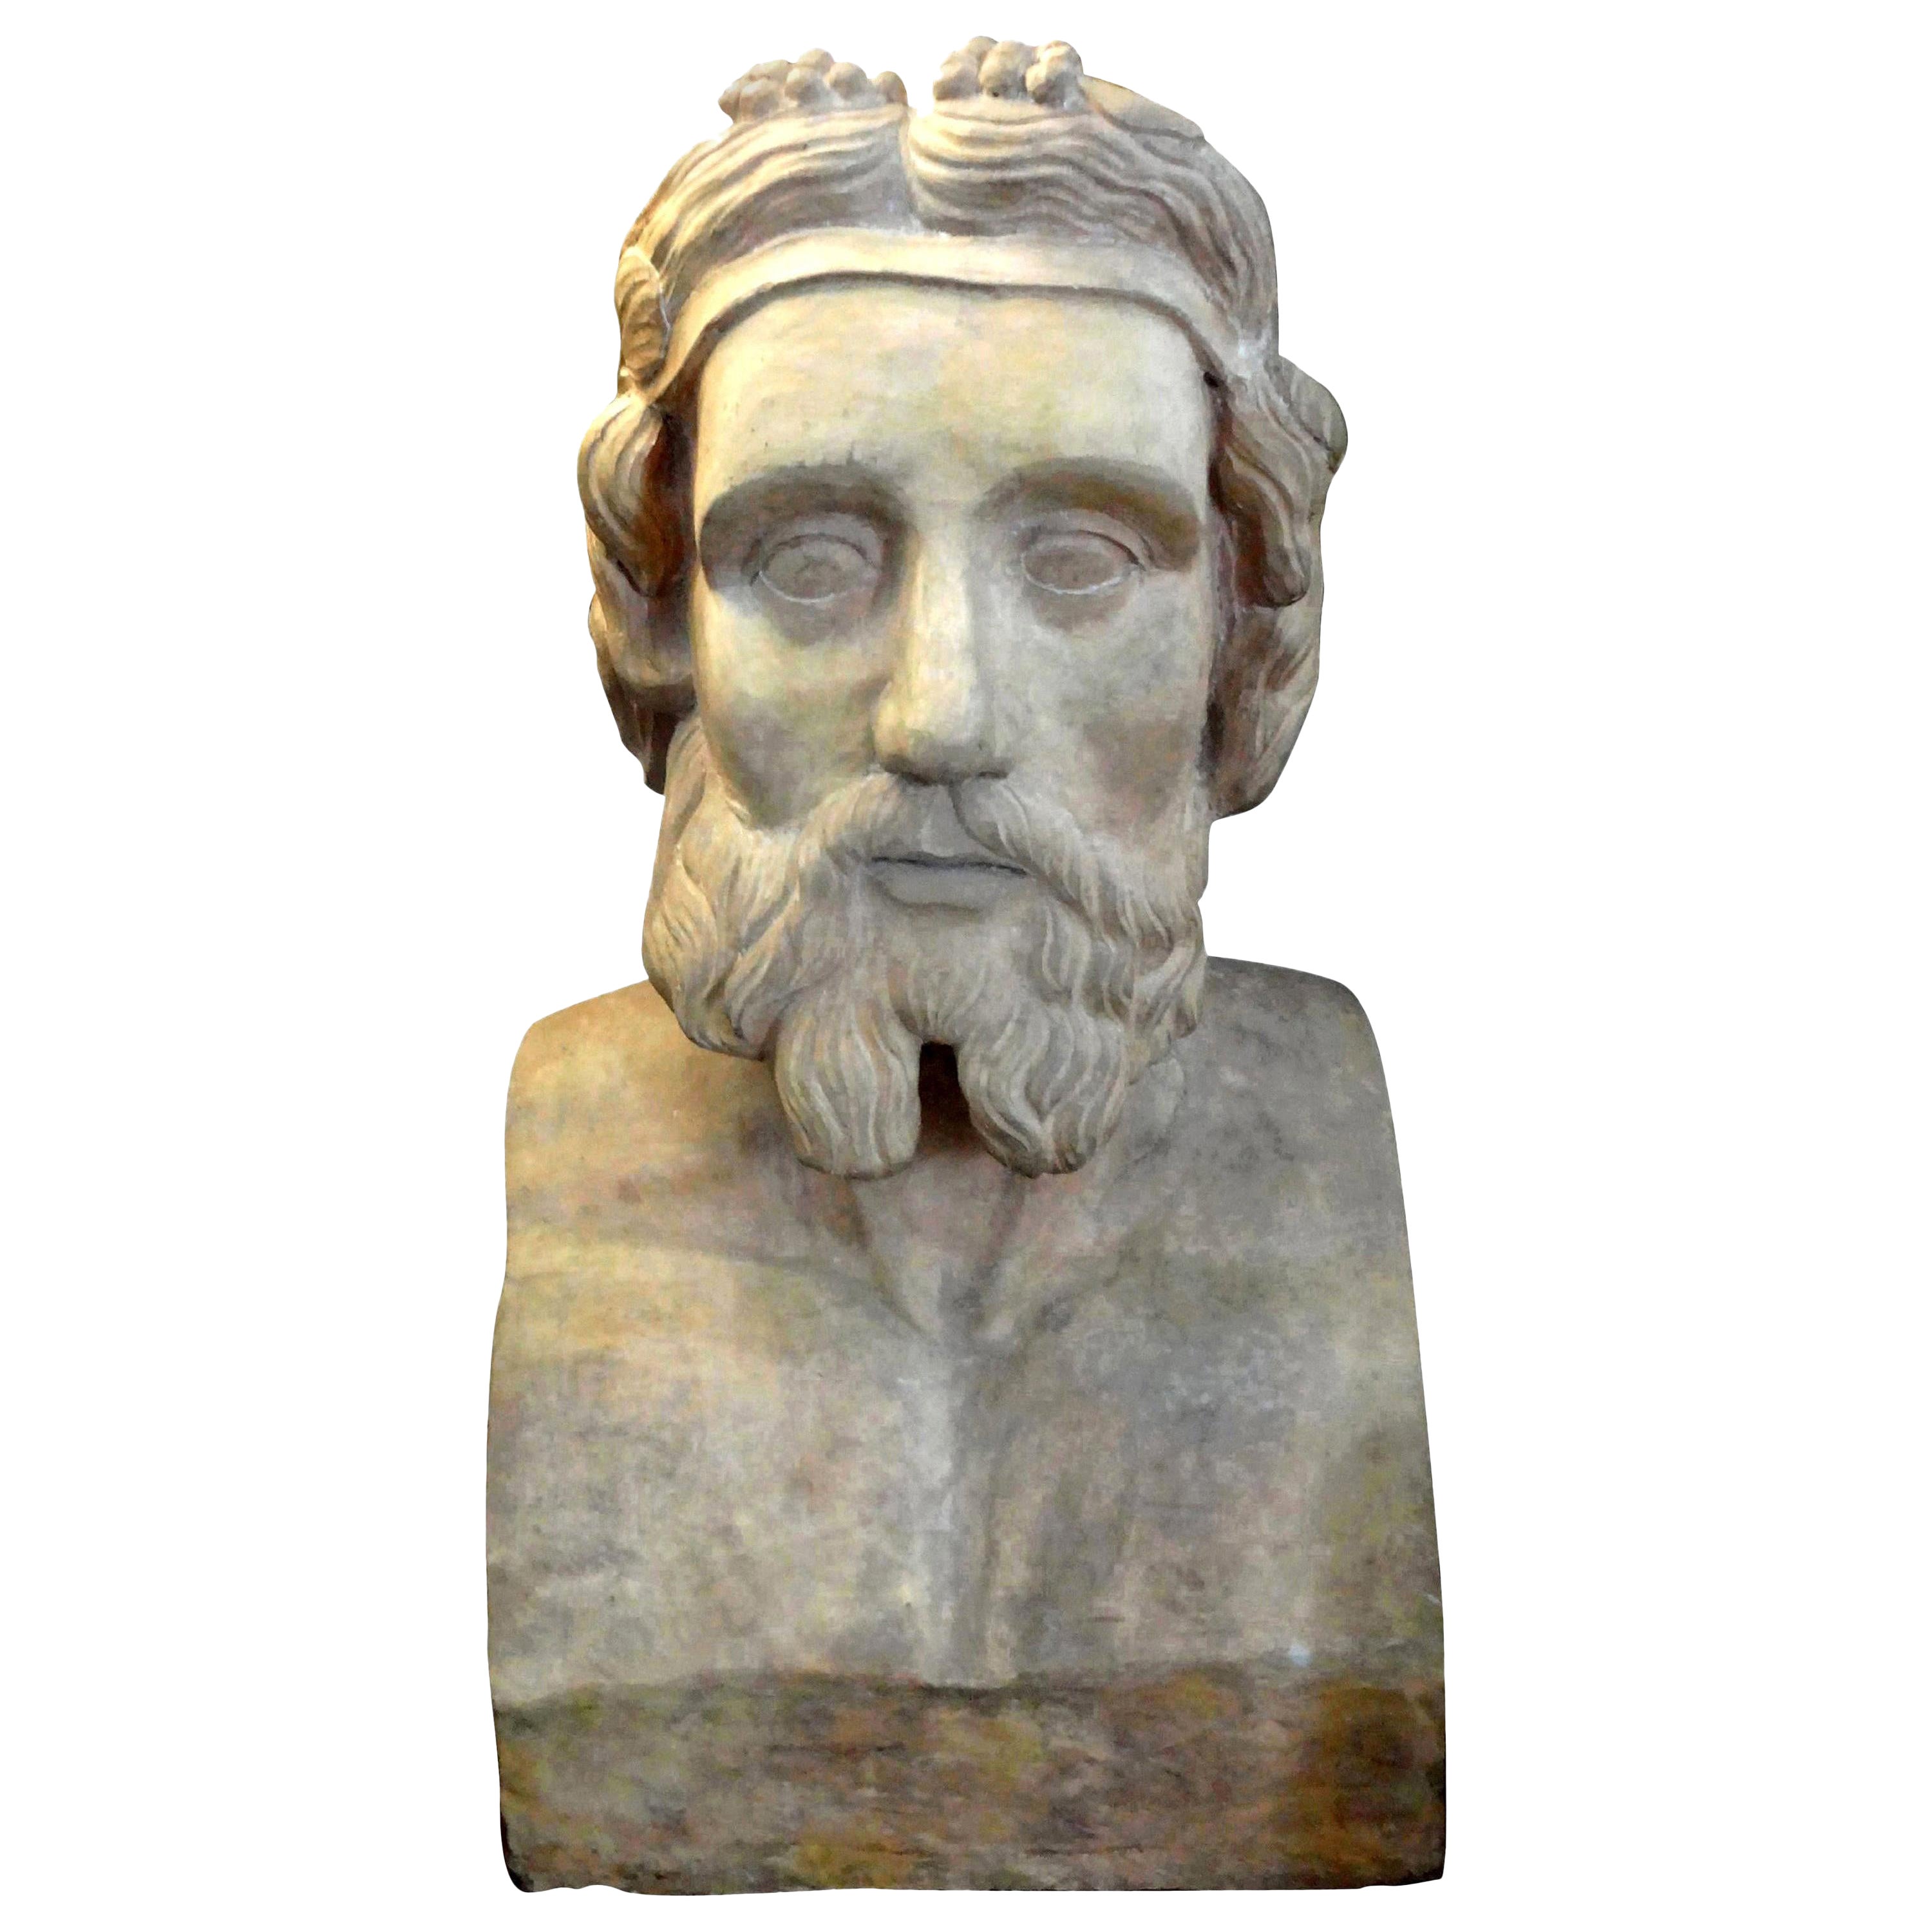 Monumental 19th Century French Terracotta Bust of a Classical Greek